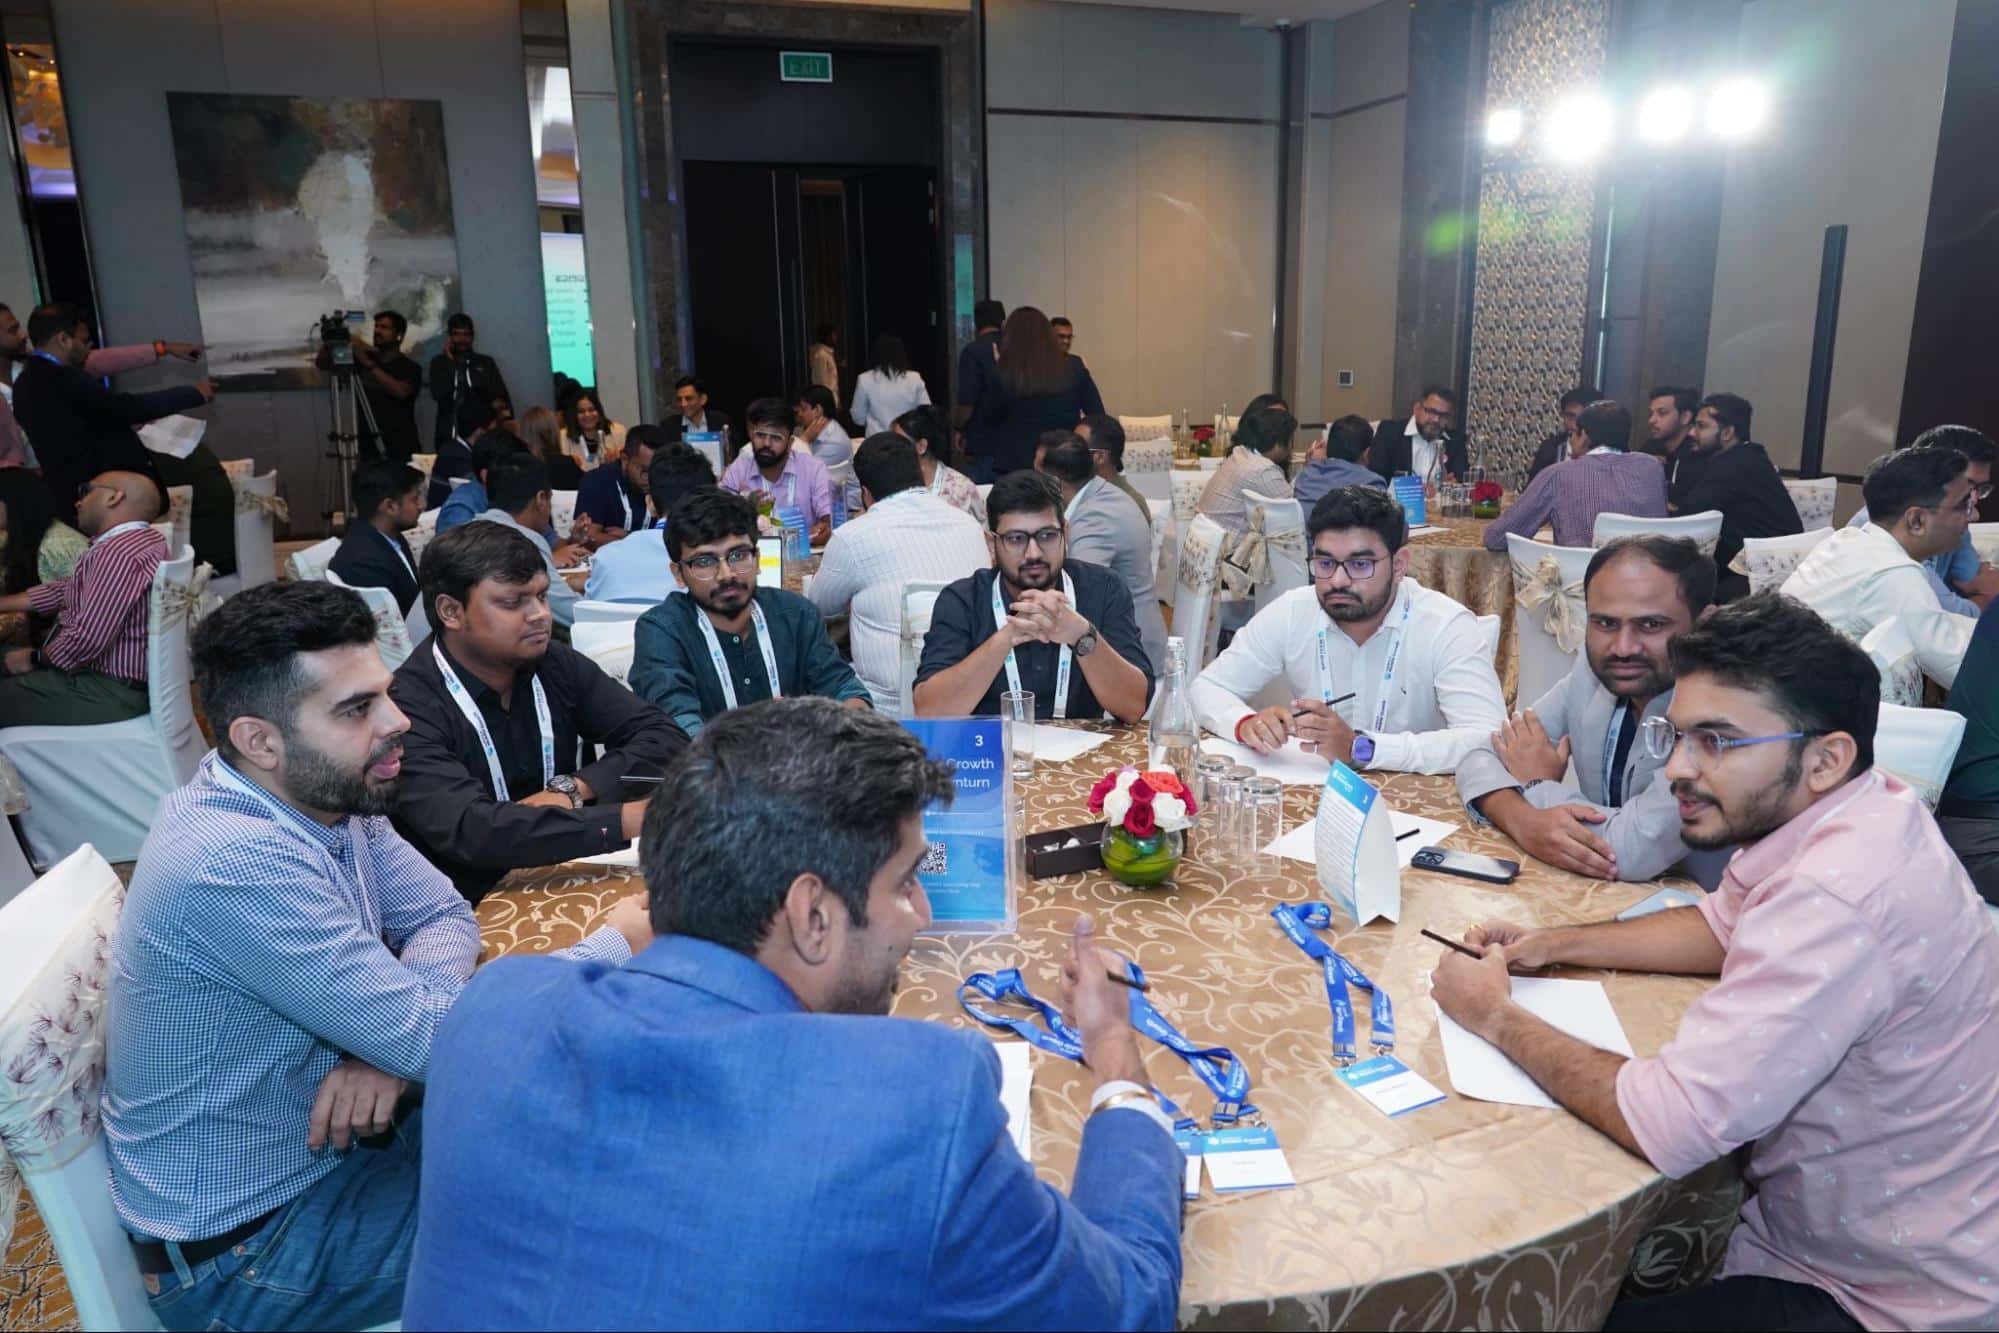 Image of attendees at Branch's LIMG Bangalore event during roundtable discussions